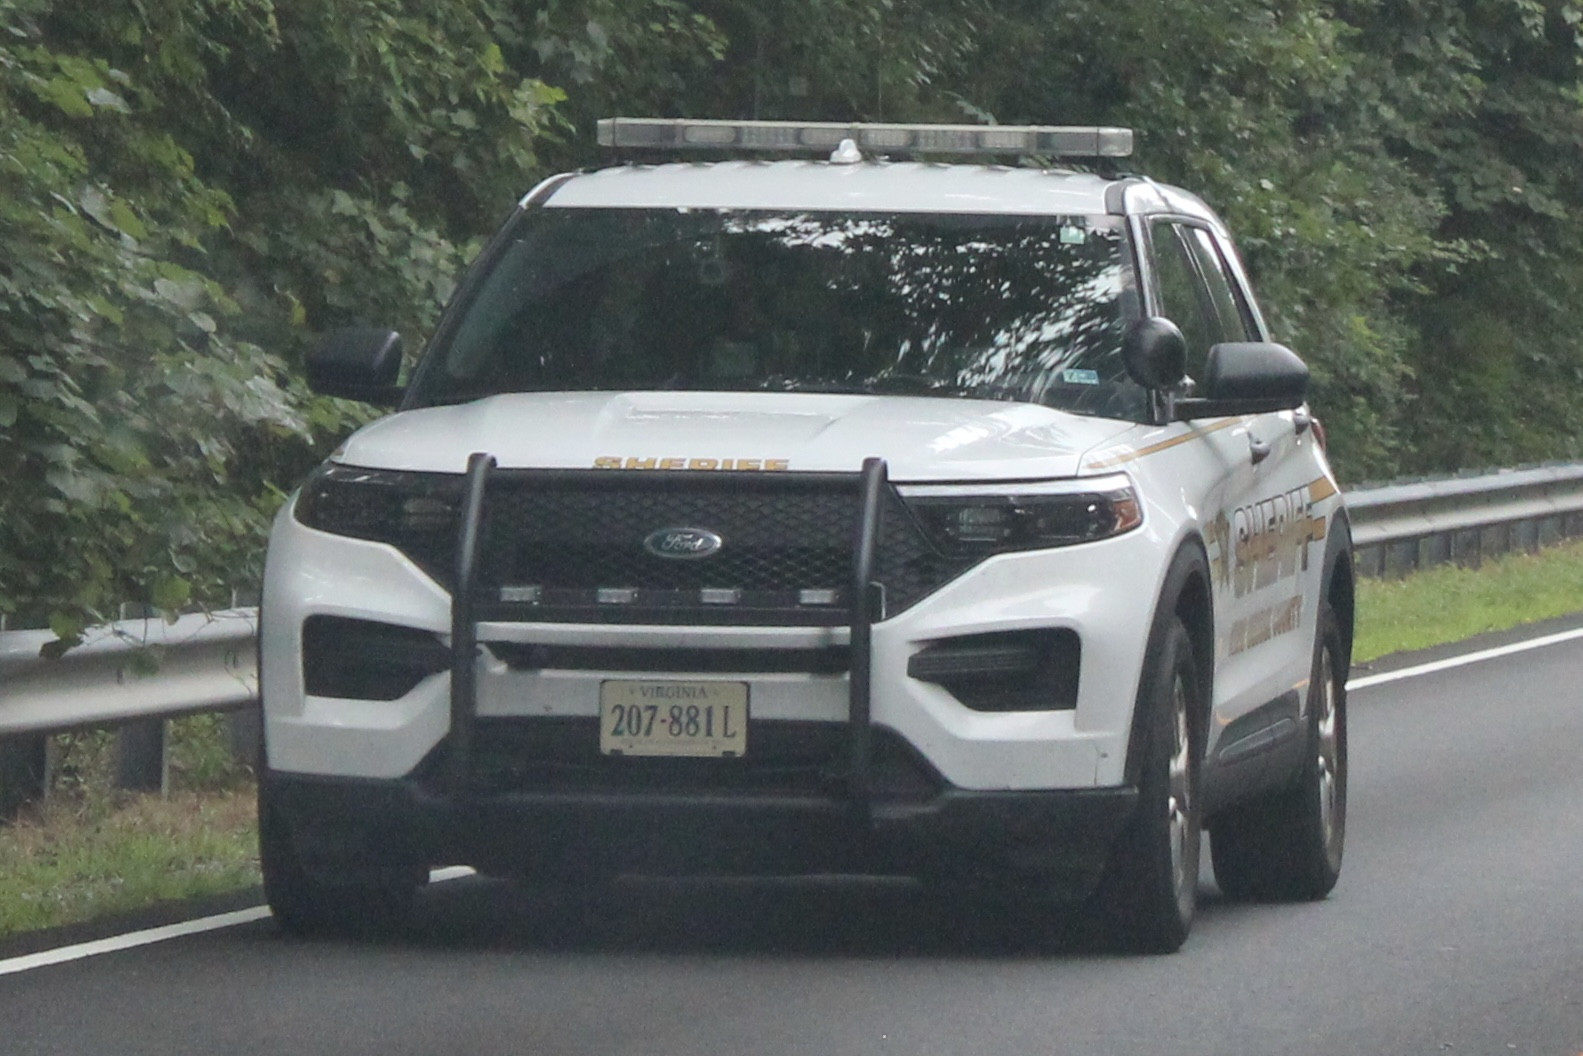 A photo  of King George County Sheriff
            Patrol Unit, a 2020 Ford Police Interceptor Utility             taken by @riemergencyvehicles